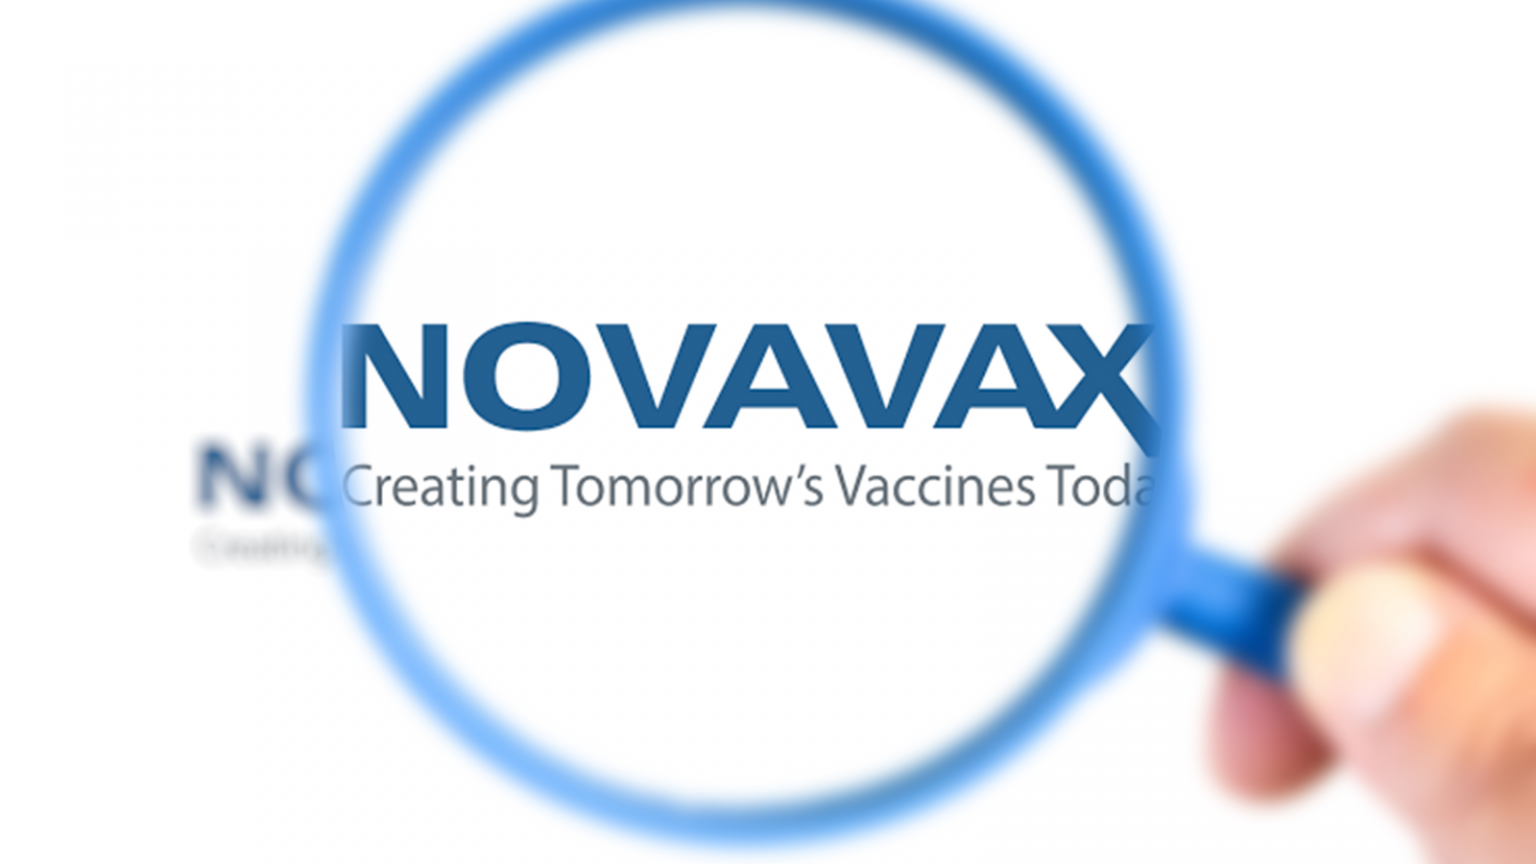 NVAX Stock Price Predictions Where Will Novavax Go From Here